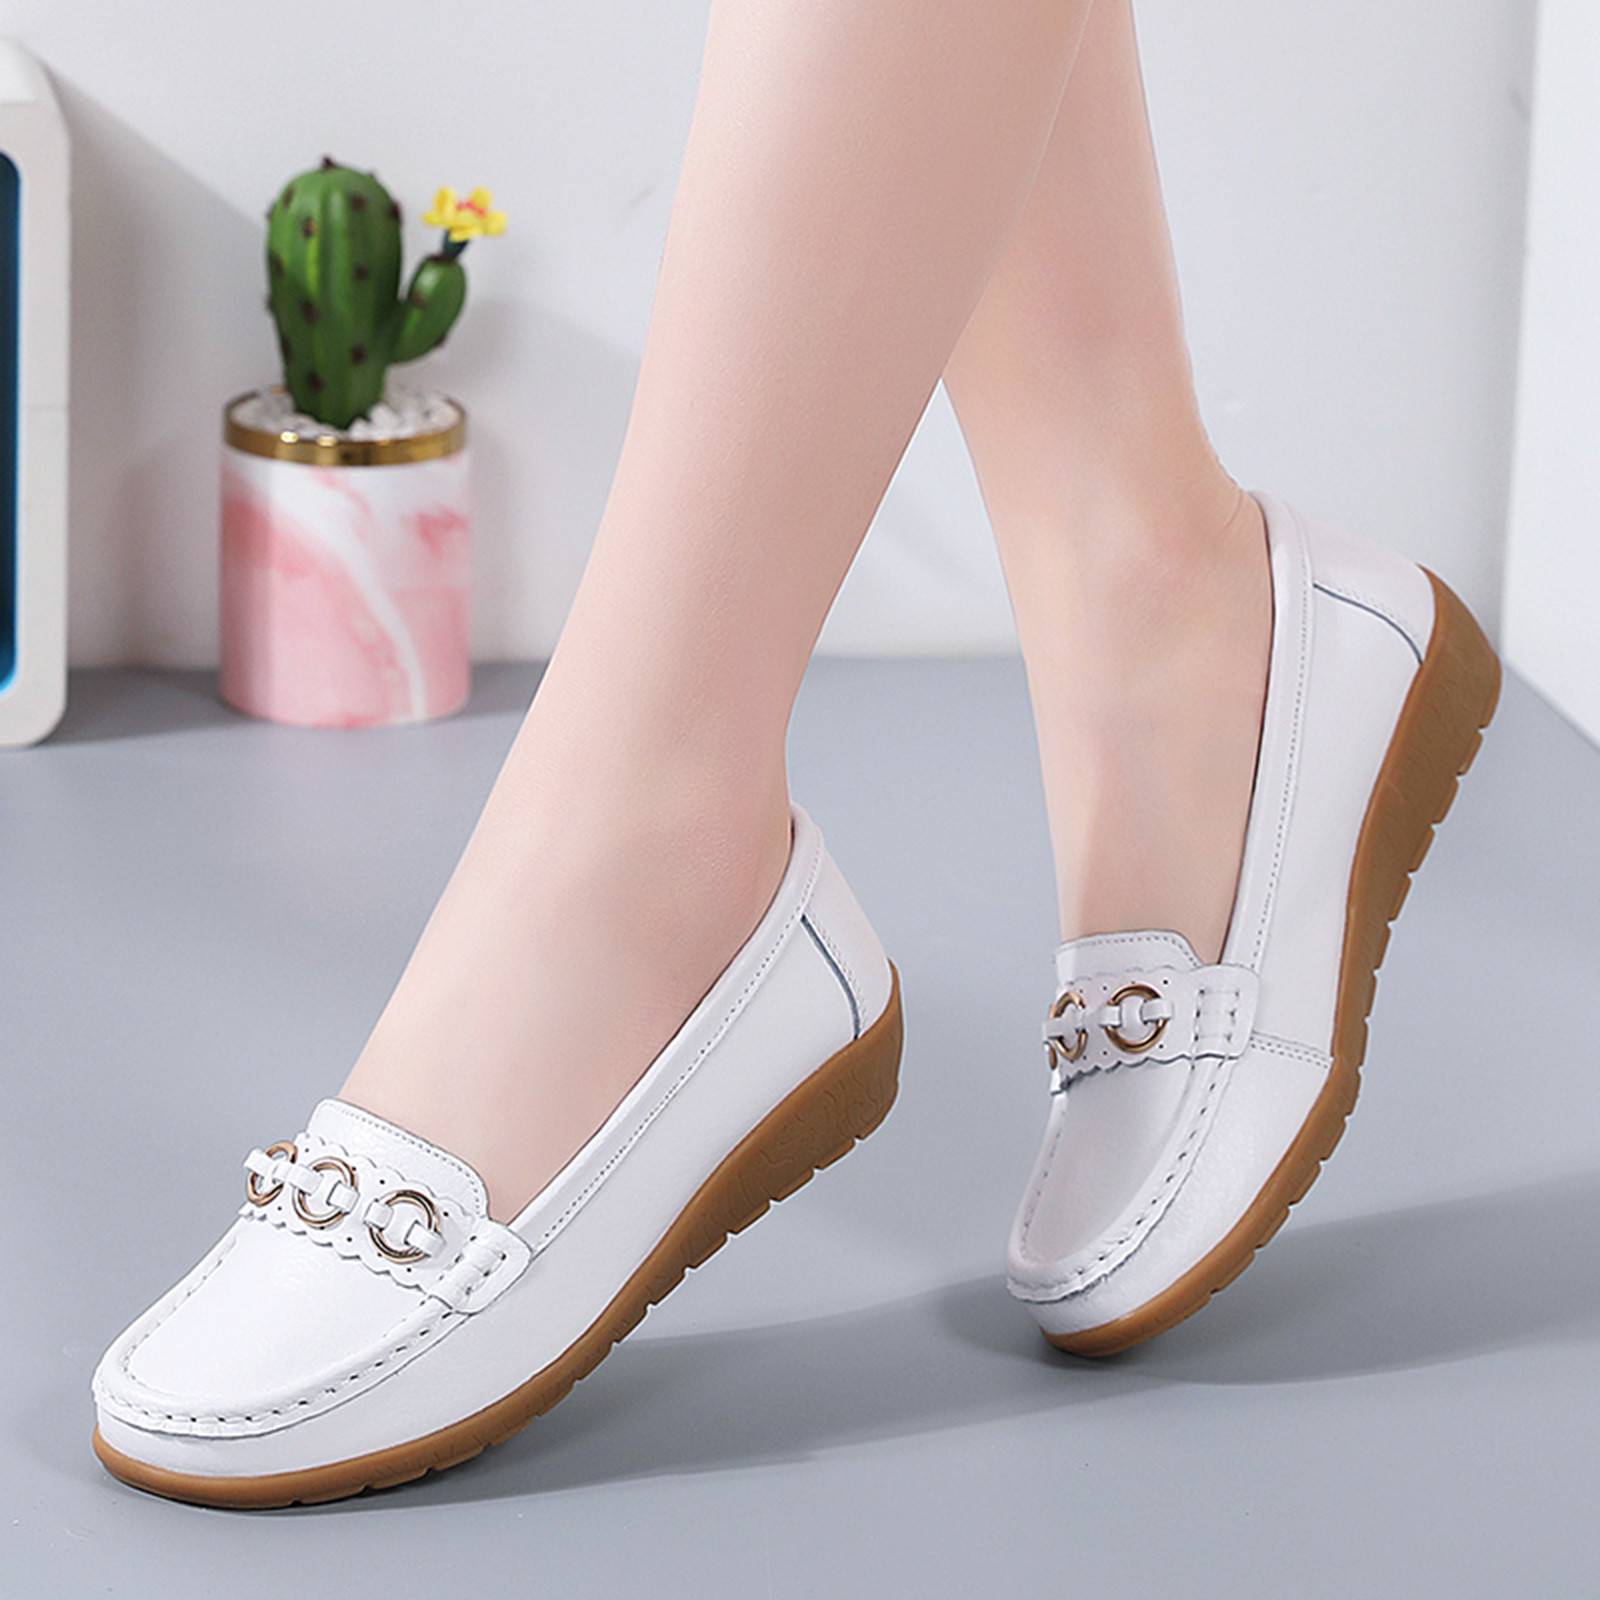 Pianpianzi Cork Sandals Women Flat Womens Flat Loafer Shoes Dance Shoes Women Flat Womens Comfort Walking Flat Loafer Slip On Leather Loafer Comfortable Flat Shoes Outdoor Driving Shoes - image 2 of 9